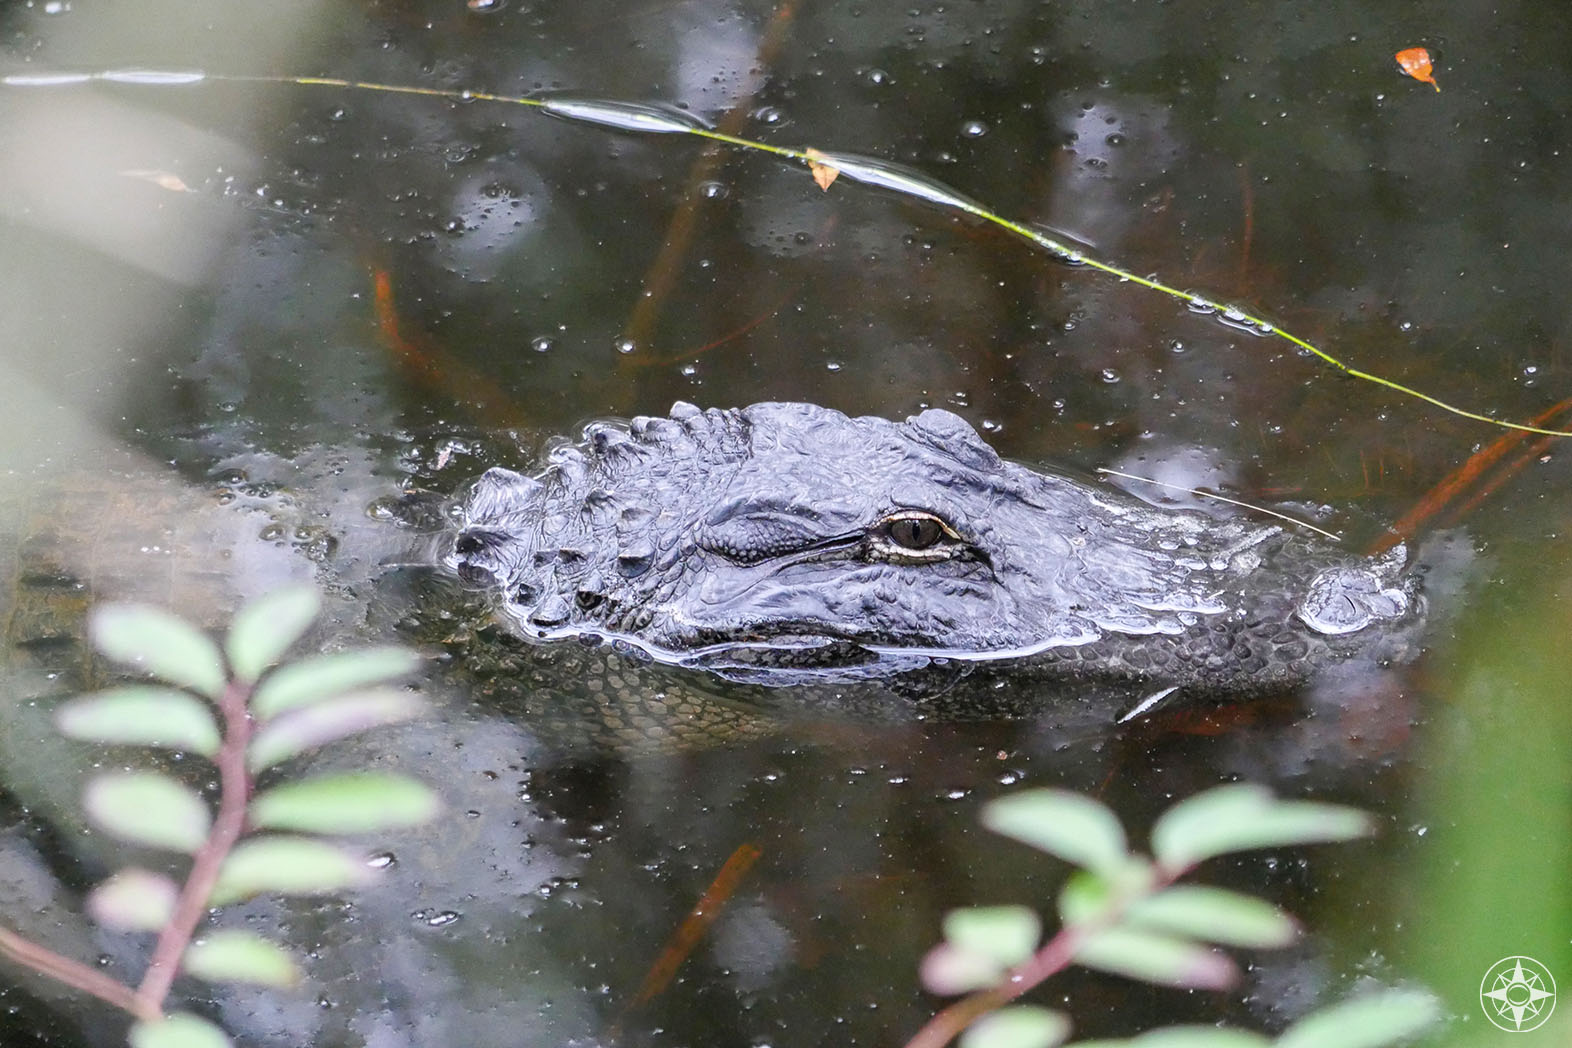 Gator Face in the river 